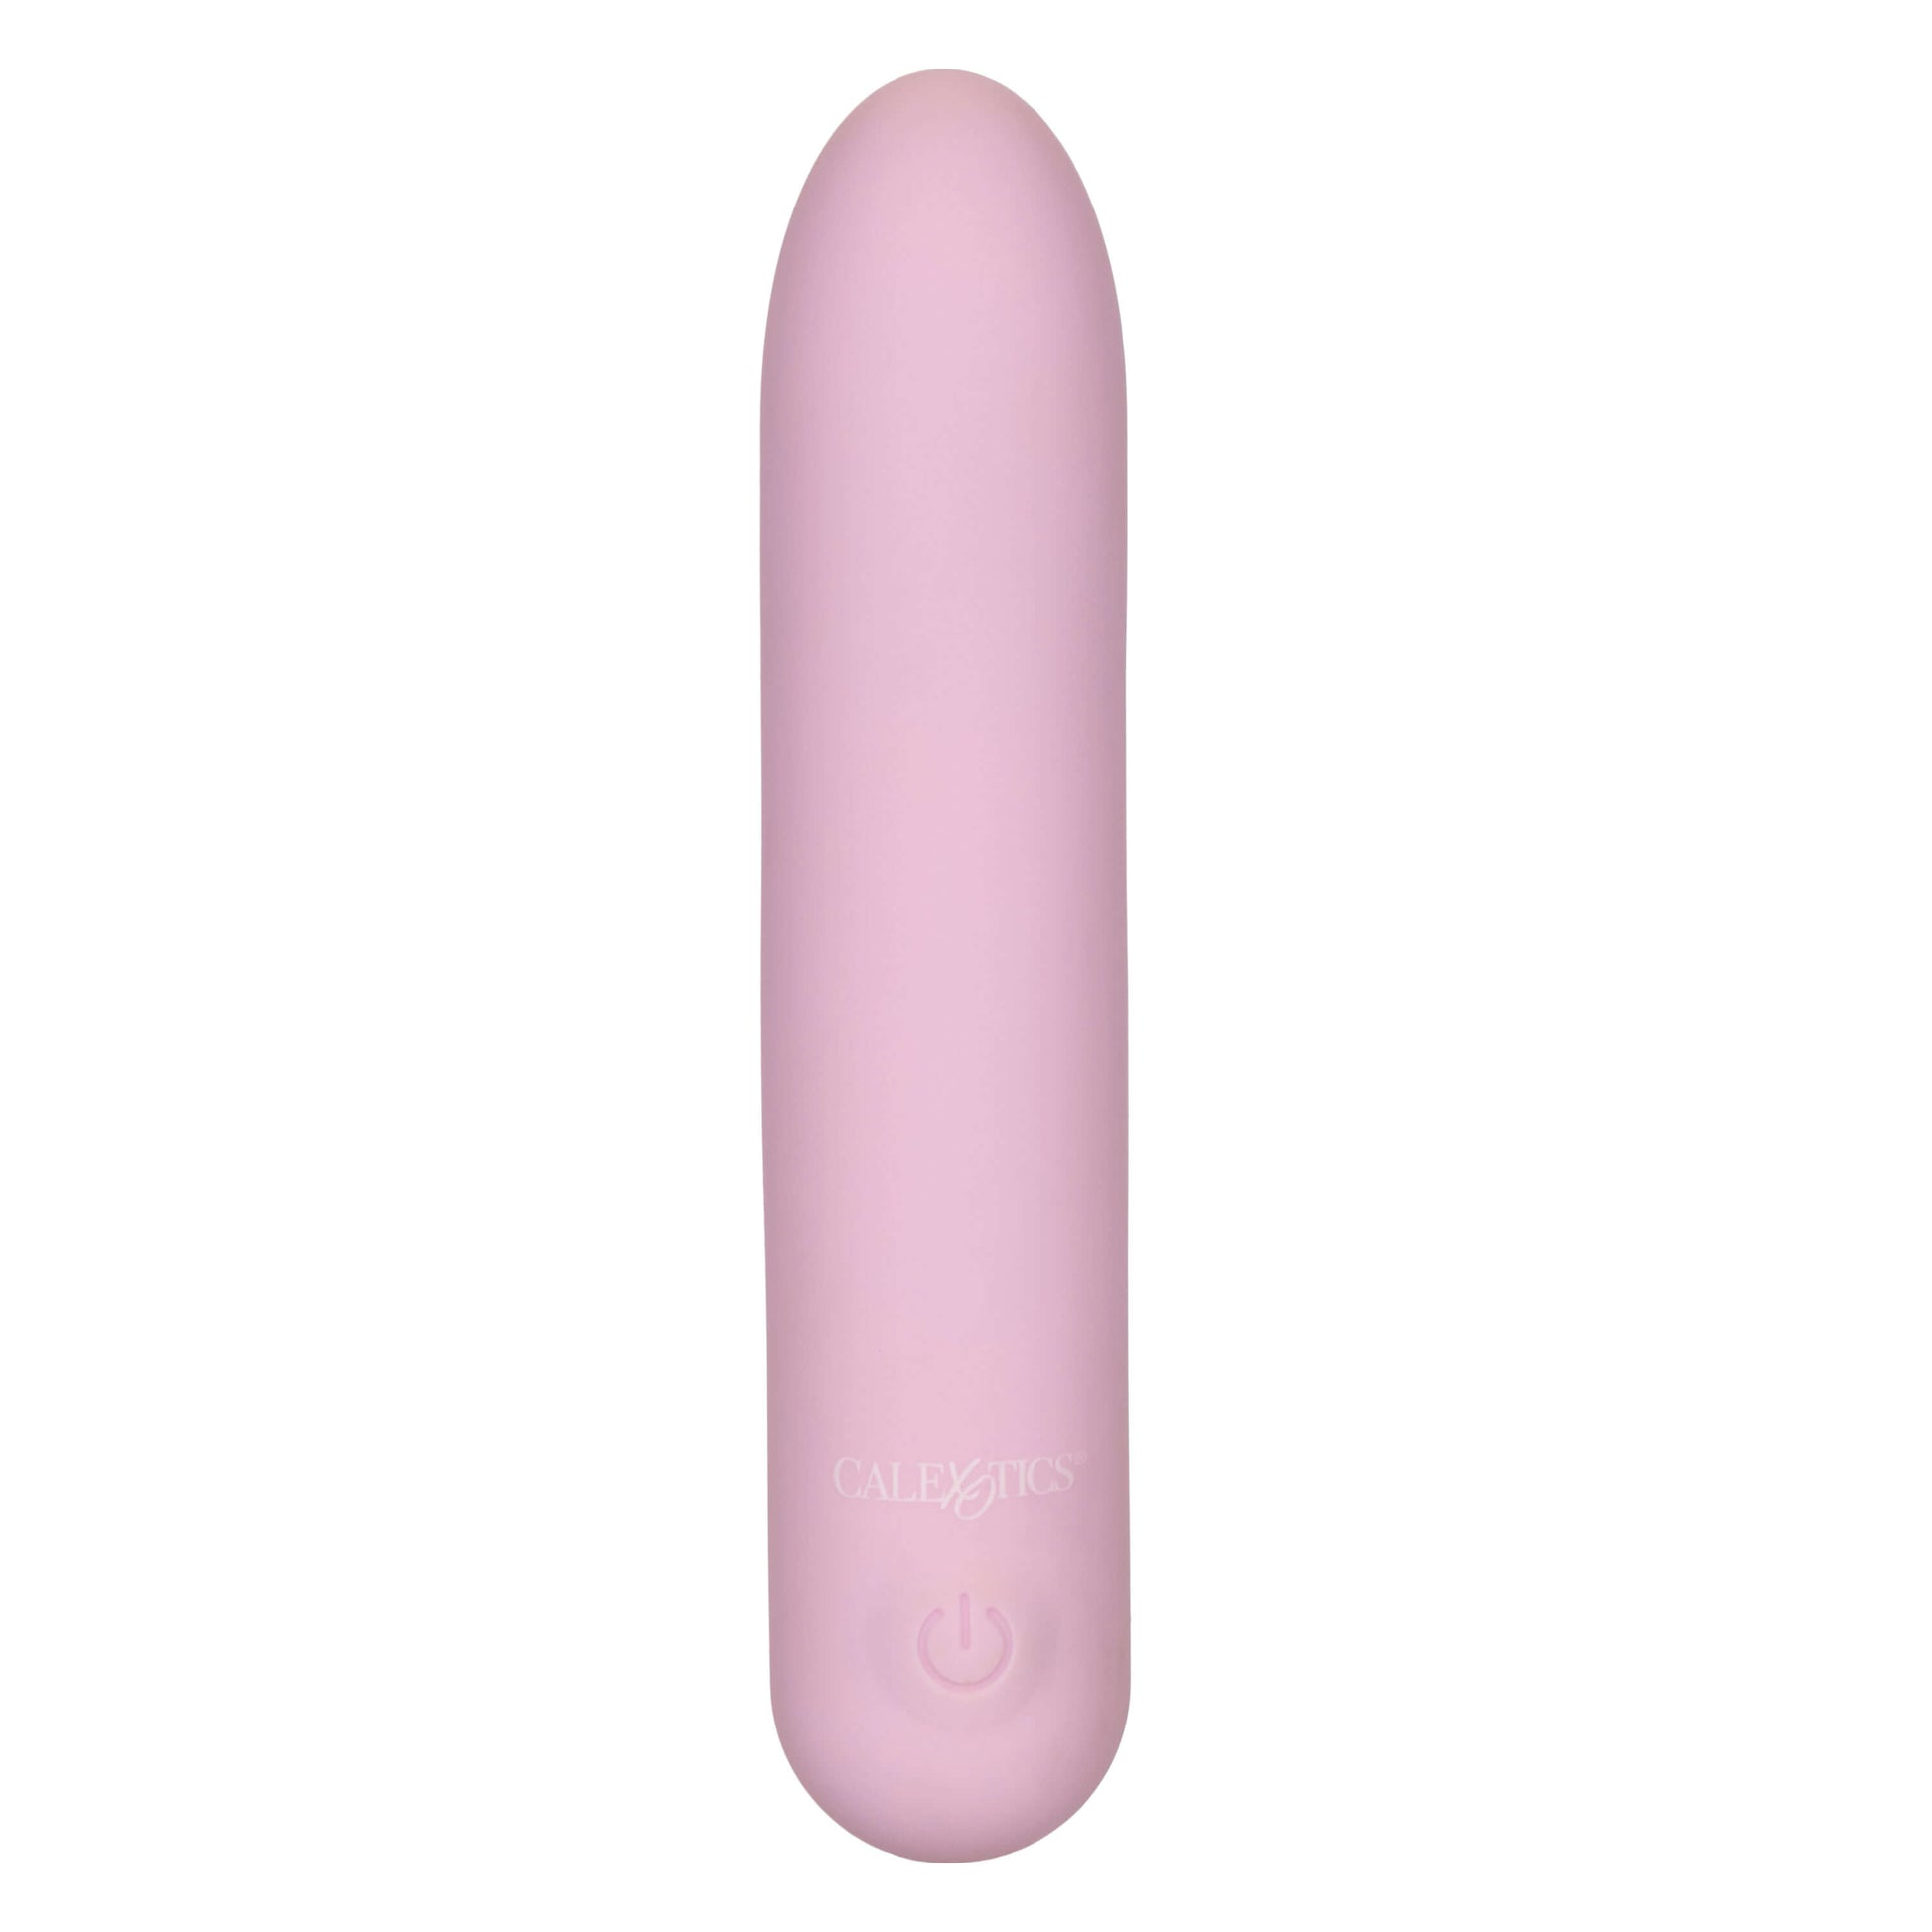 Slay #Charm Me Vibrator - CalExotics - by The Bigger O  - an online sex toy shop. We ship to USA, Canada and the UK.